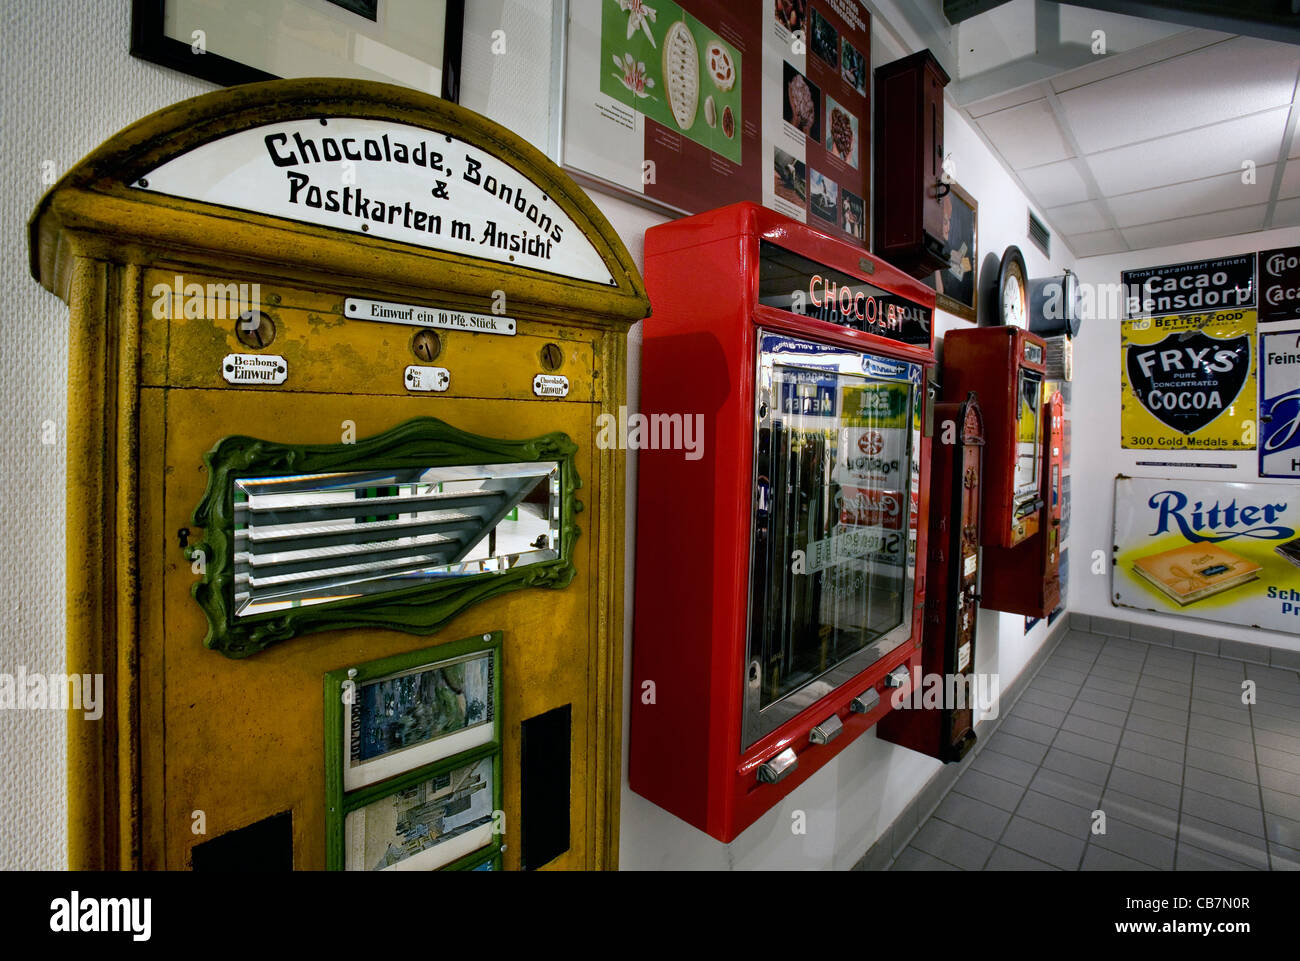 Interior of the Jacques Chocolate Museum showing old confectionery dispensers, venders and slot machines, Eupen, Belgium Stock Photo